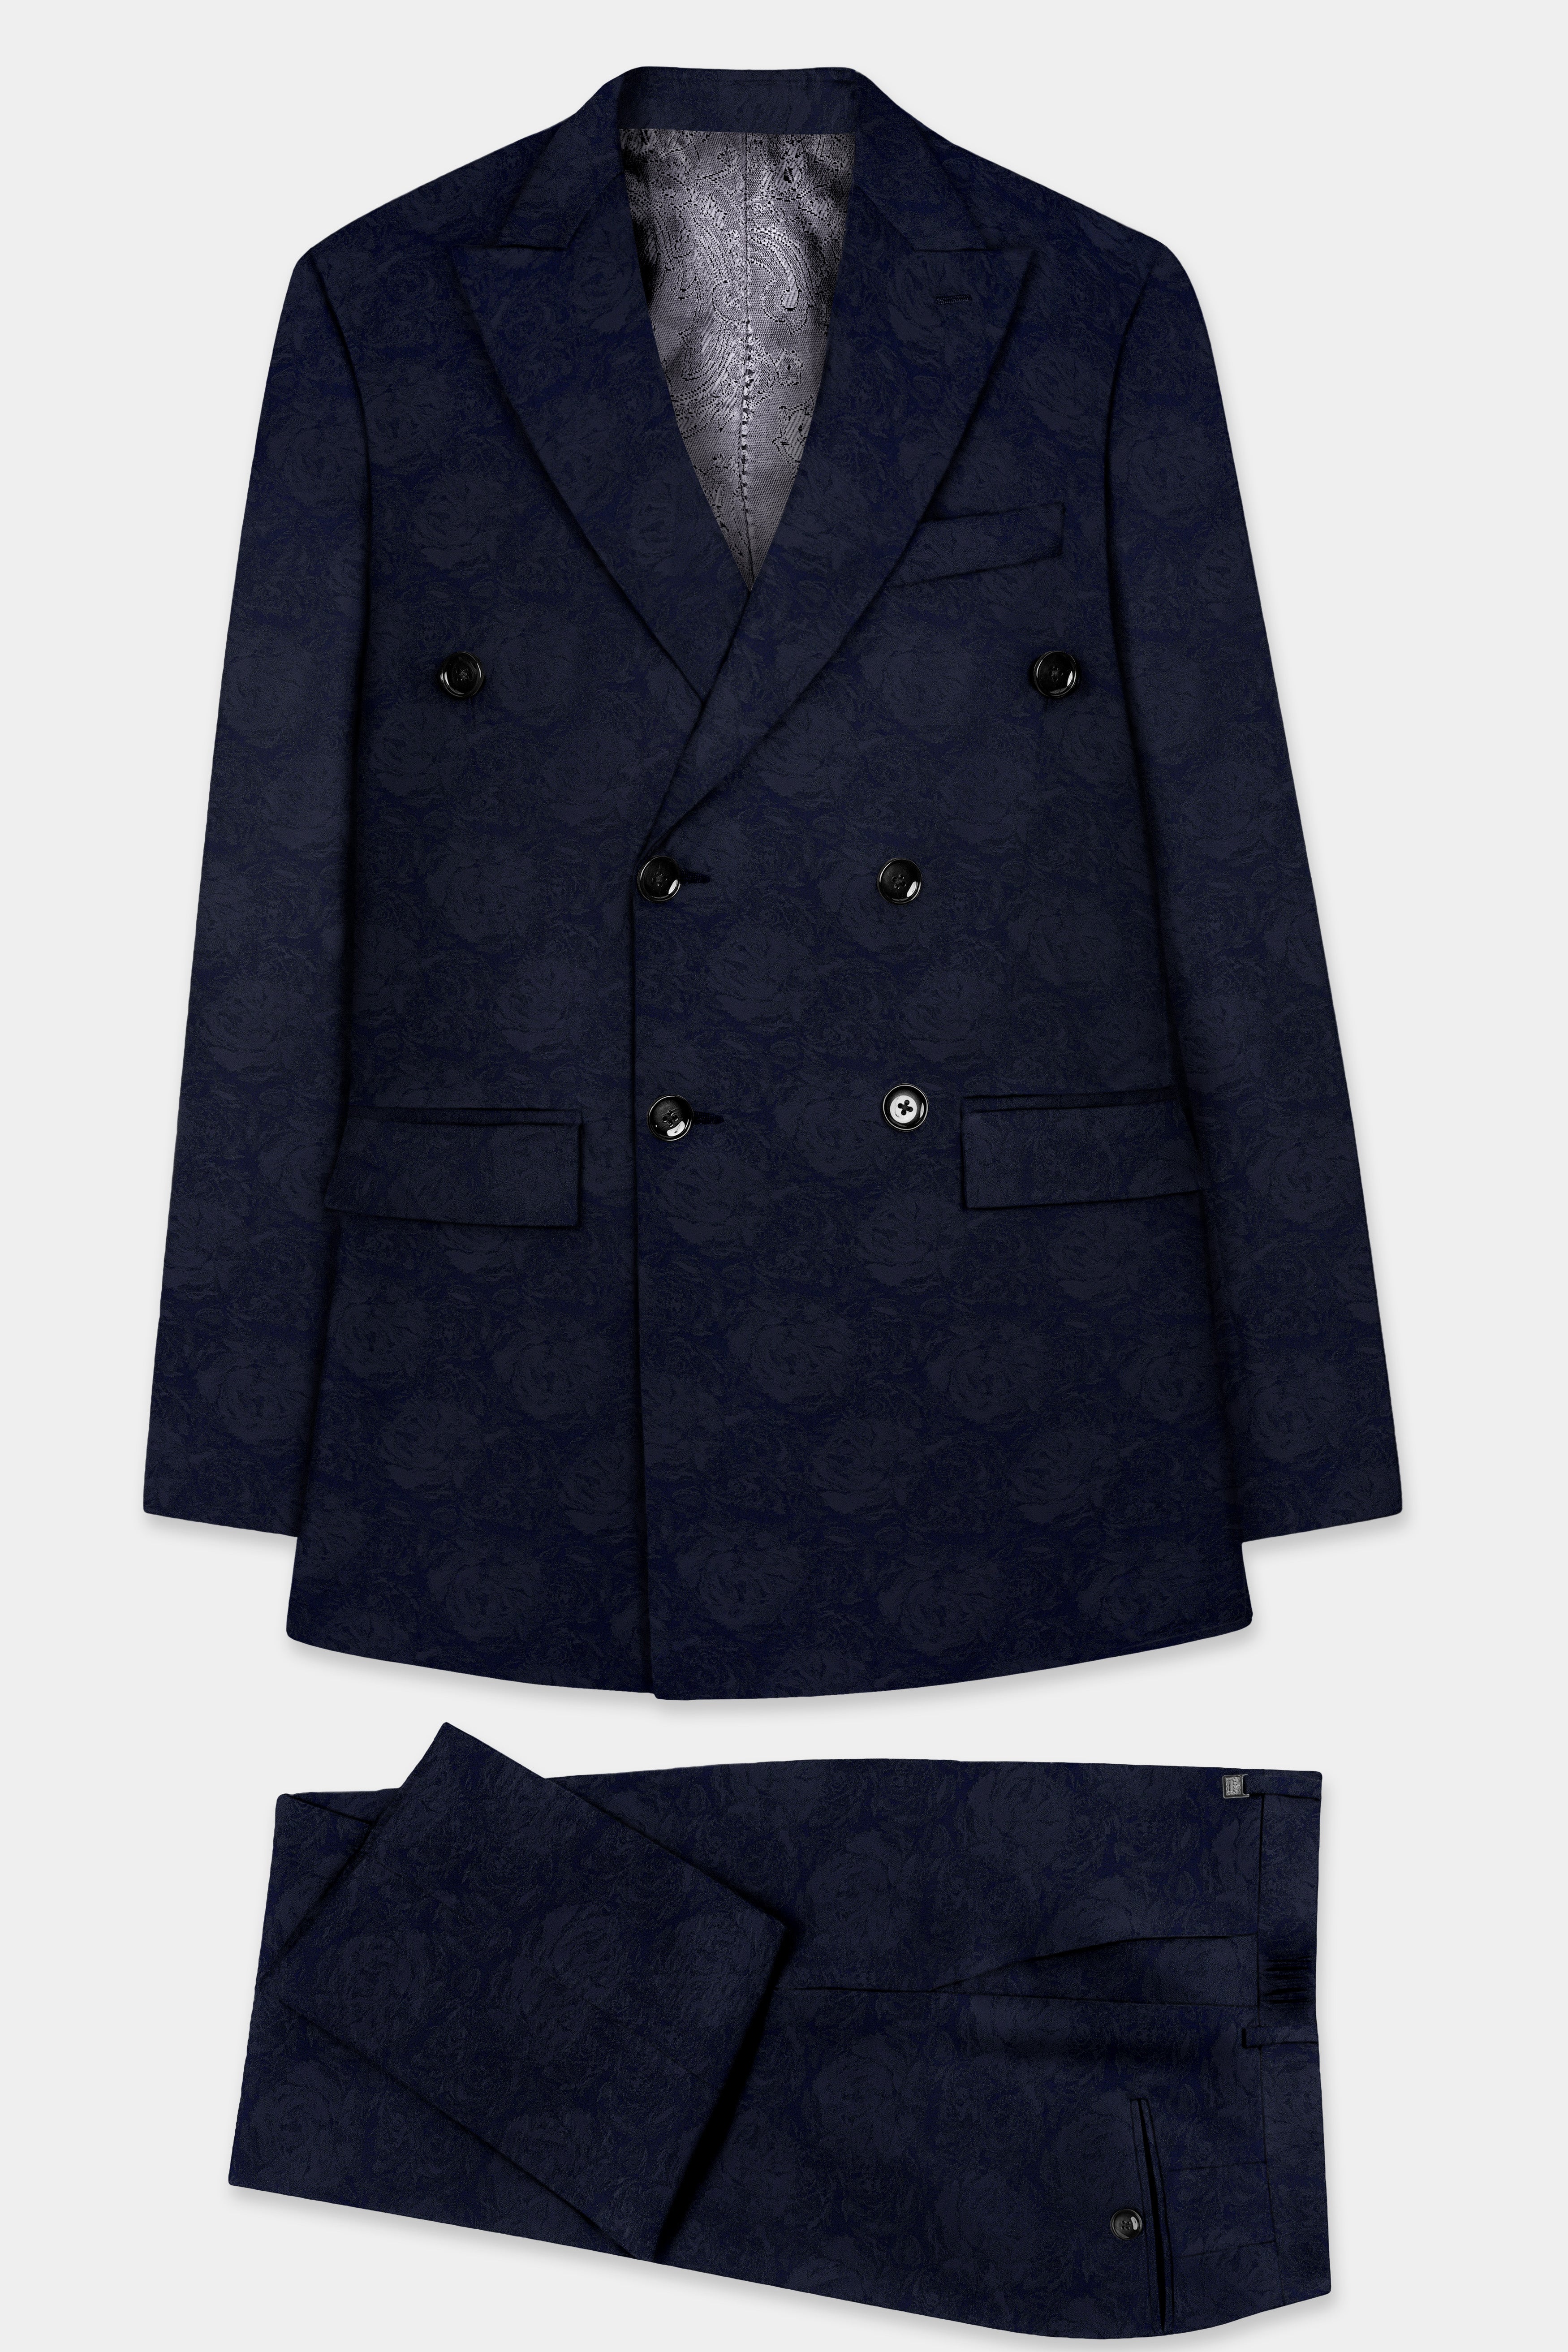 Firefly Blue Jacquard Textured Double Breasted Suit